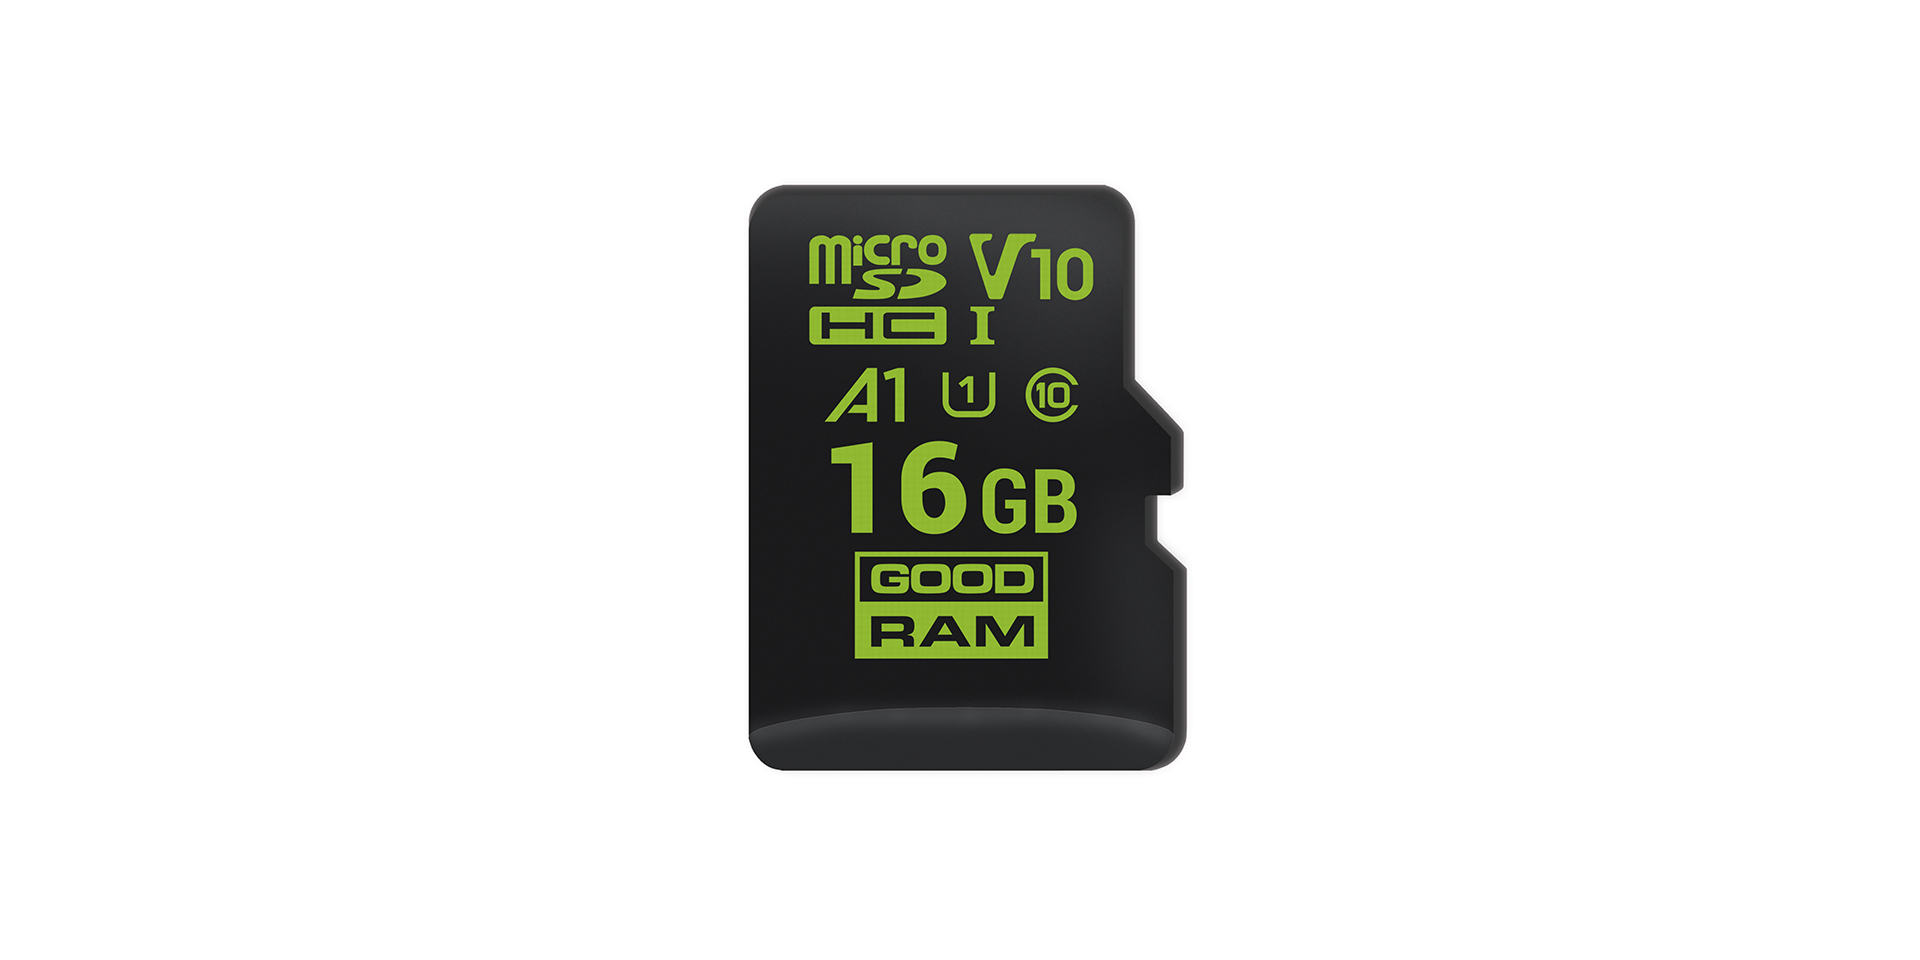 Microcard para smartphones Android